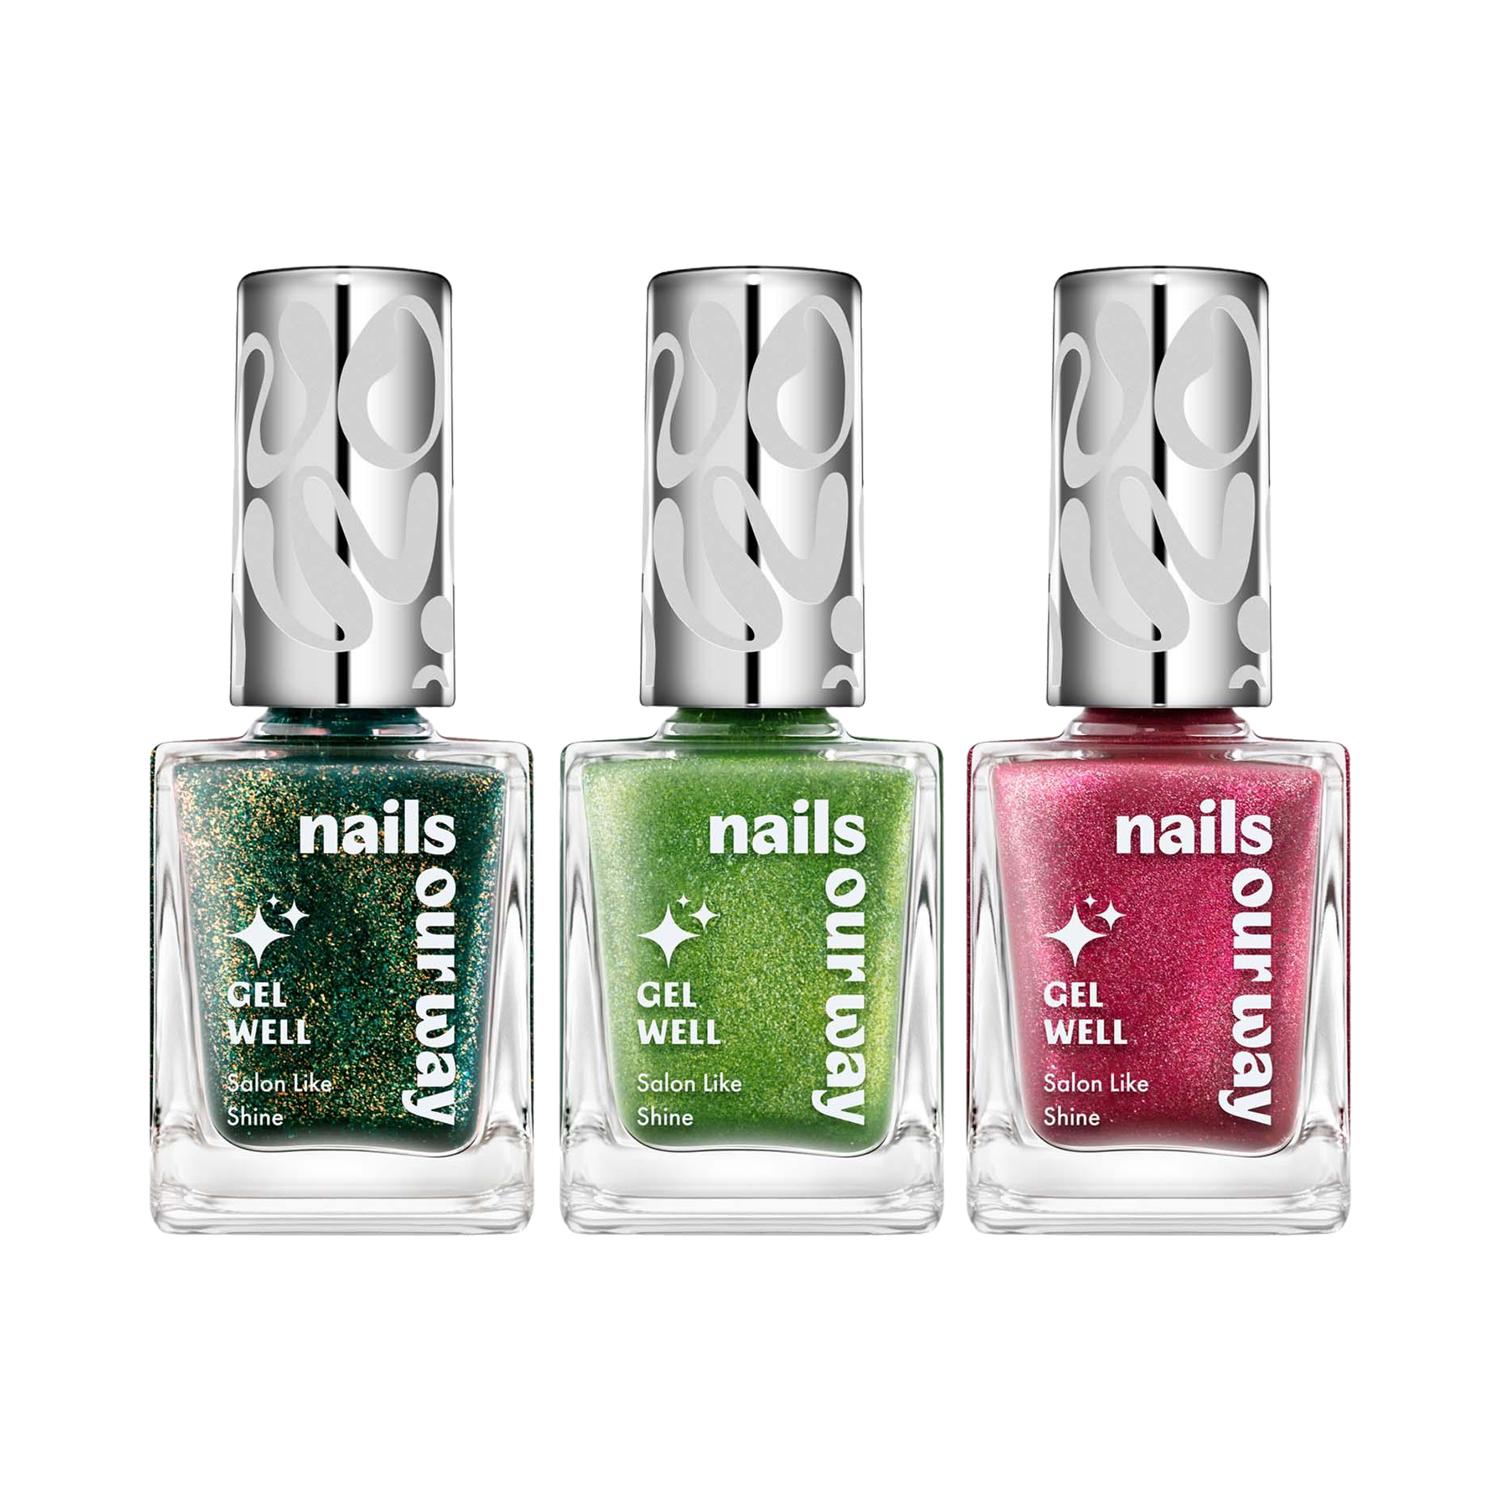 Nails Our Way | Nails Our Way Gel Well Nail Enamel Bore The Boredom Combo - Pk3